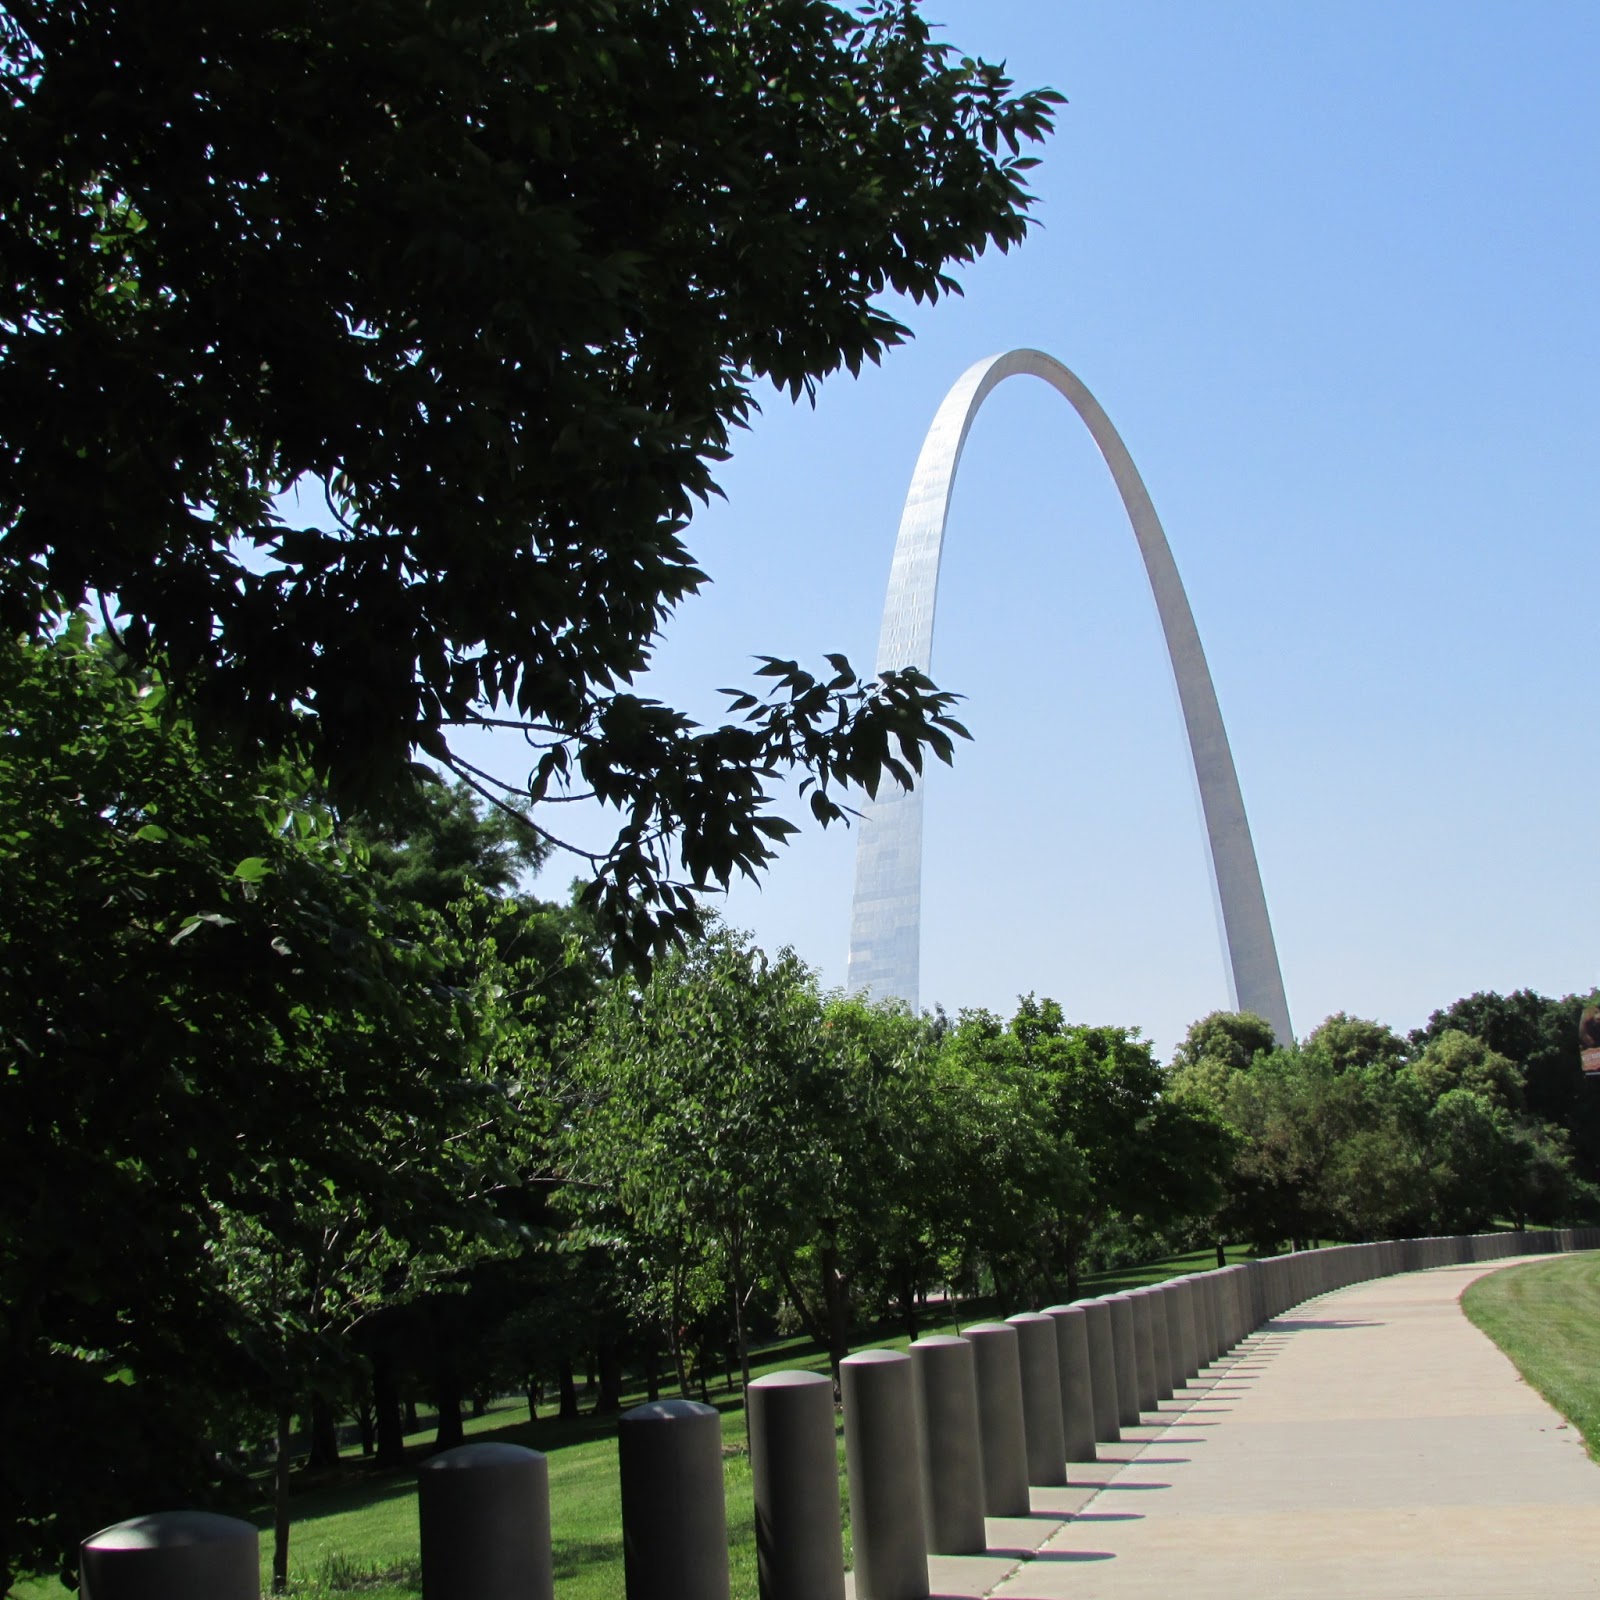 The Ultimate Life List: LIFE LIST: SEE THE GATEWAY ARCH